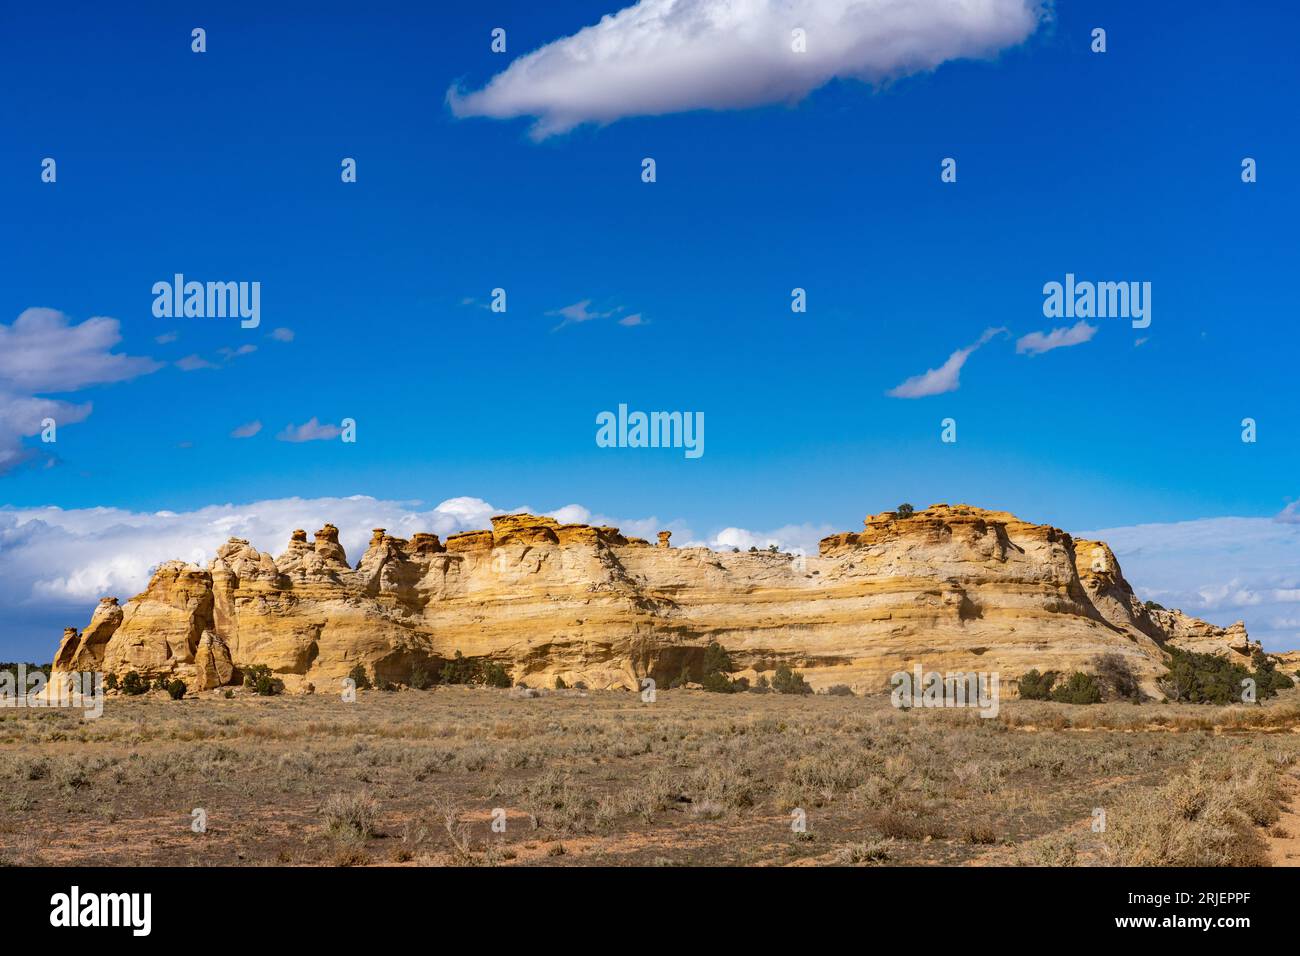 Colorful hoodoos, or rock formations, on a Navajo Sandstone mesa in the Head of Sinbad area of the San Rafael Swell in Utah. Stock Photo